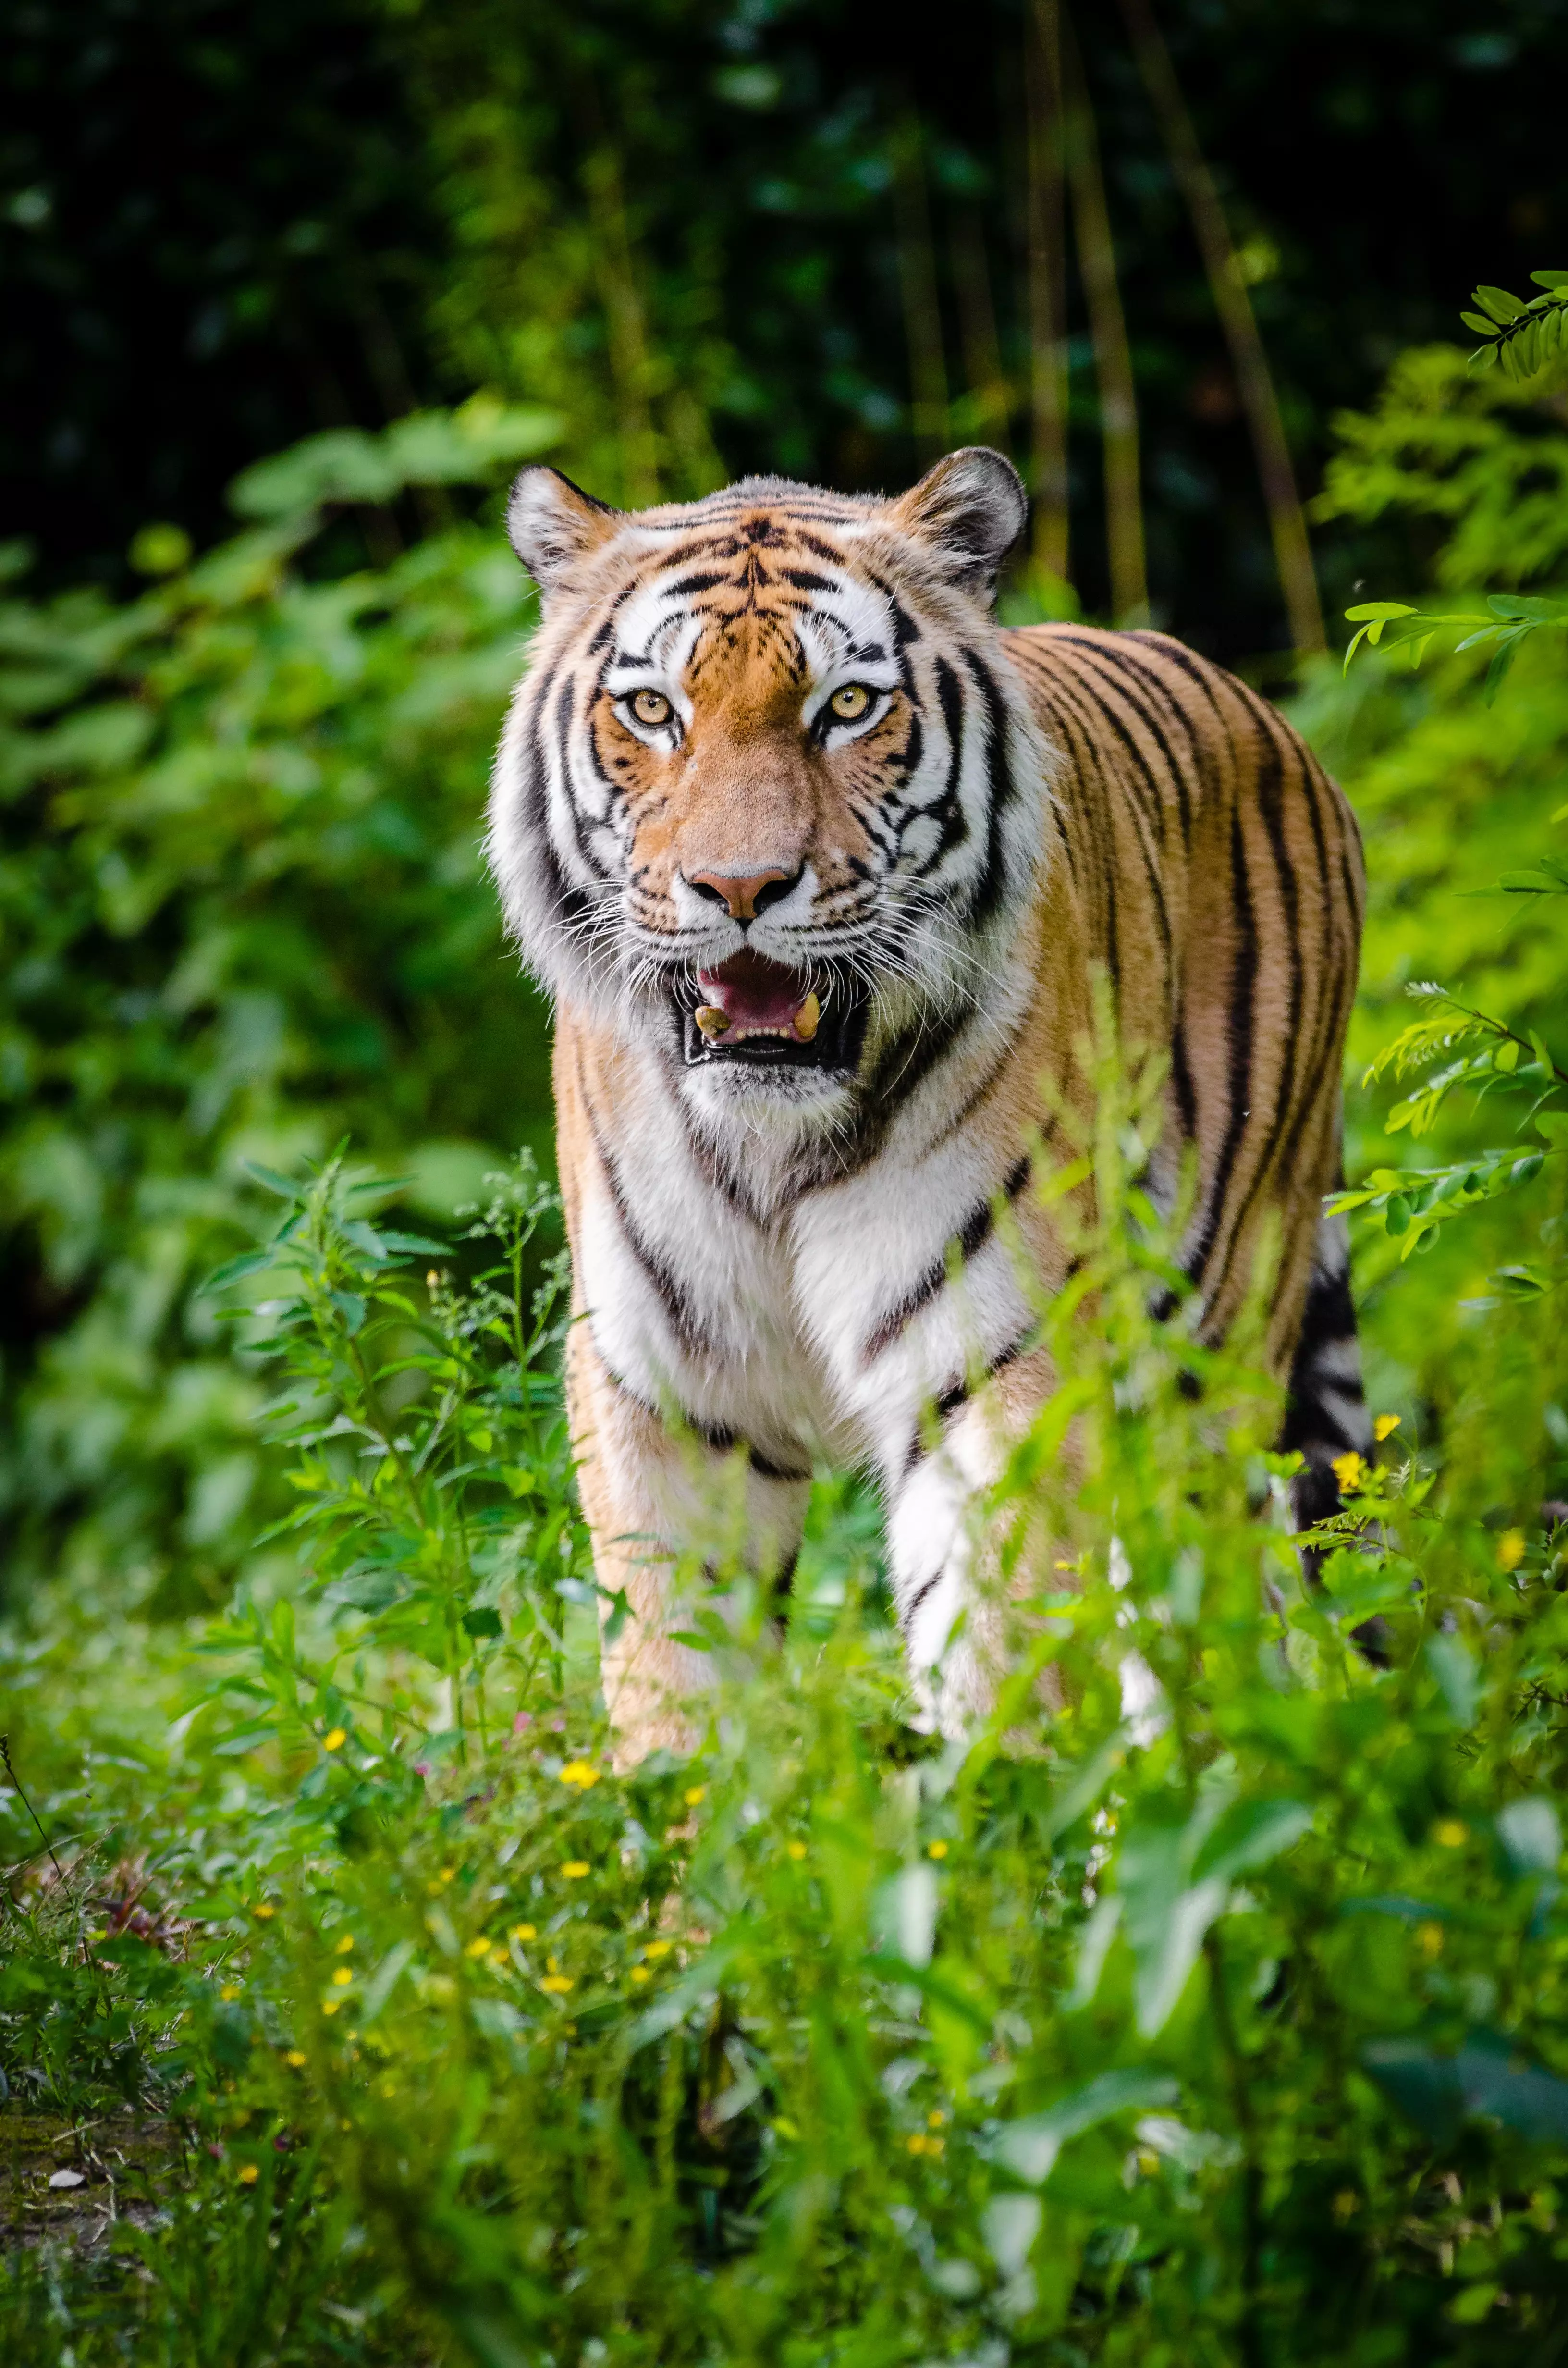 Madhya Pradesh has the largest number of tigers, totalling 526 (